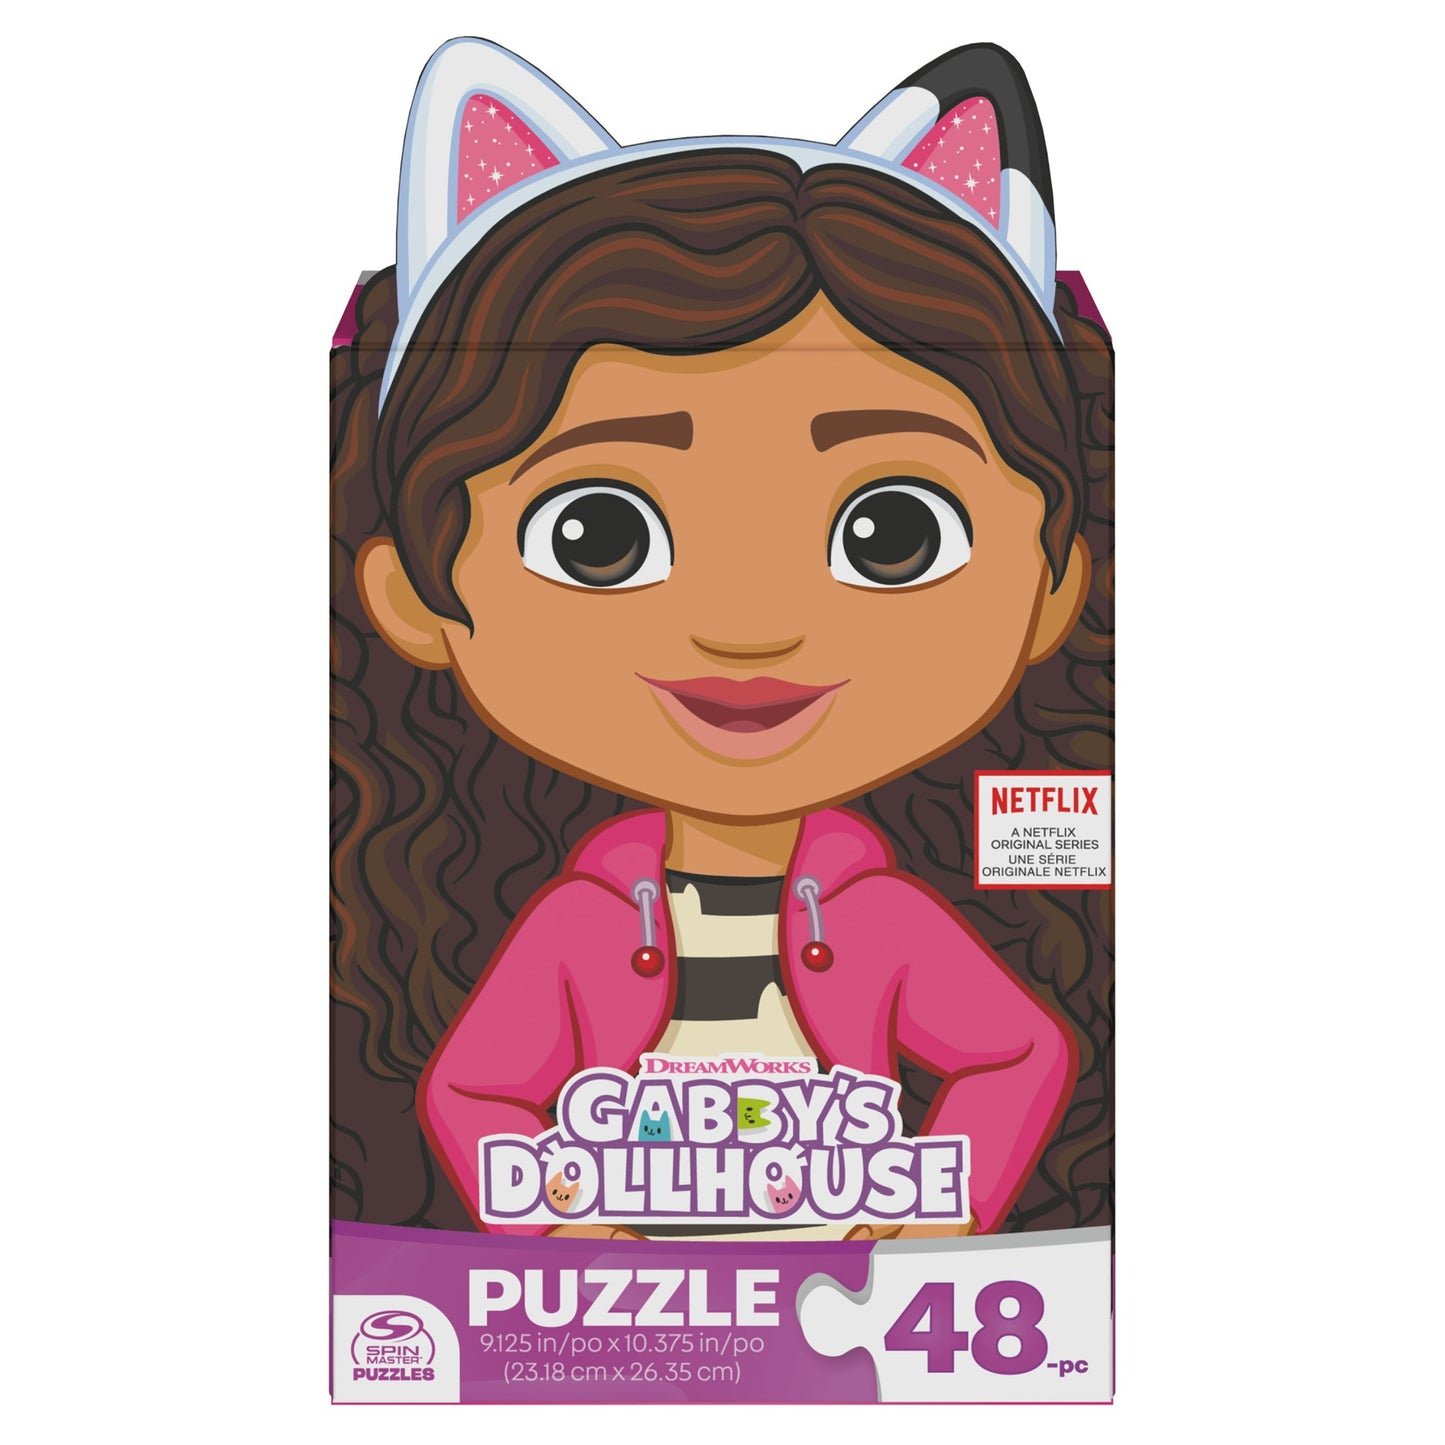 GABBY'S DOLLHOUSE CHARACTER PUZZLE 48PCS